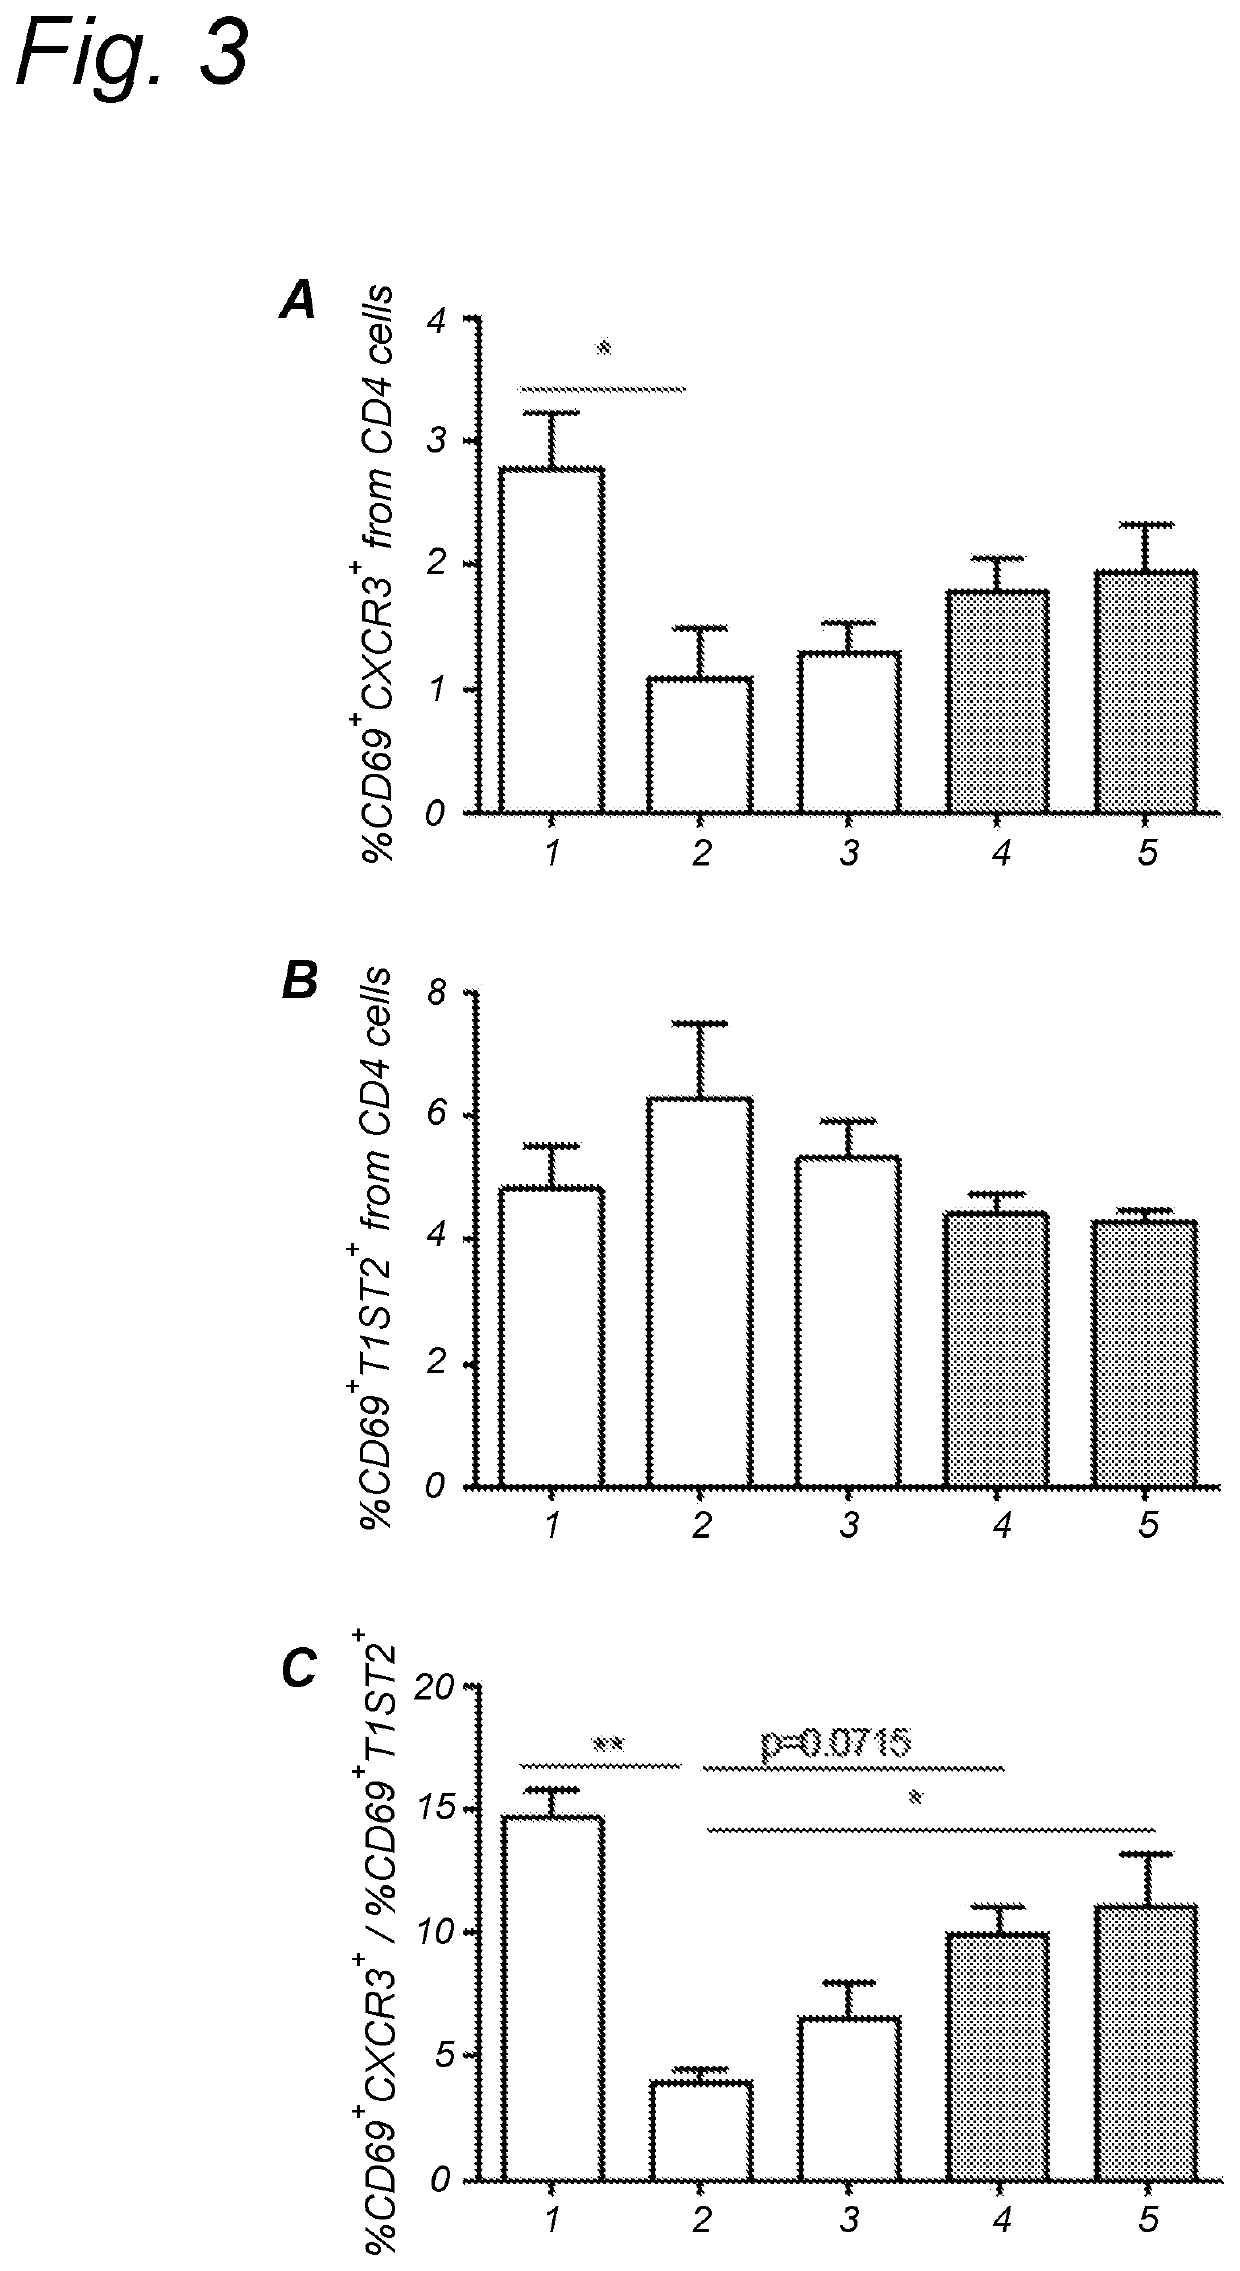 Method for inducing oral tolerance via administration of beta-lactoglobulin derived peptides in combination with probiotic